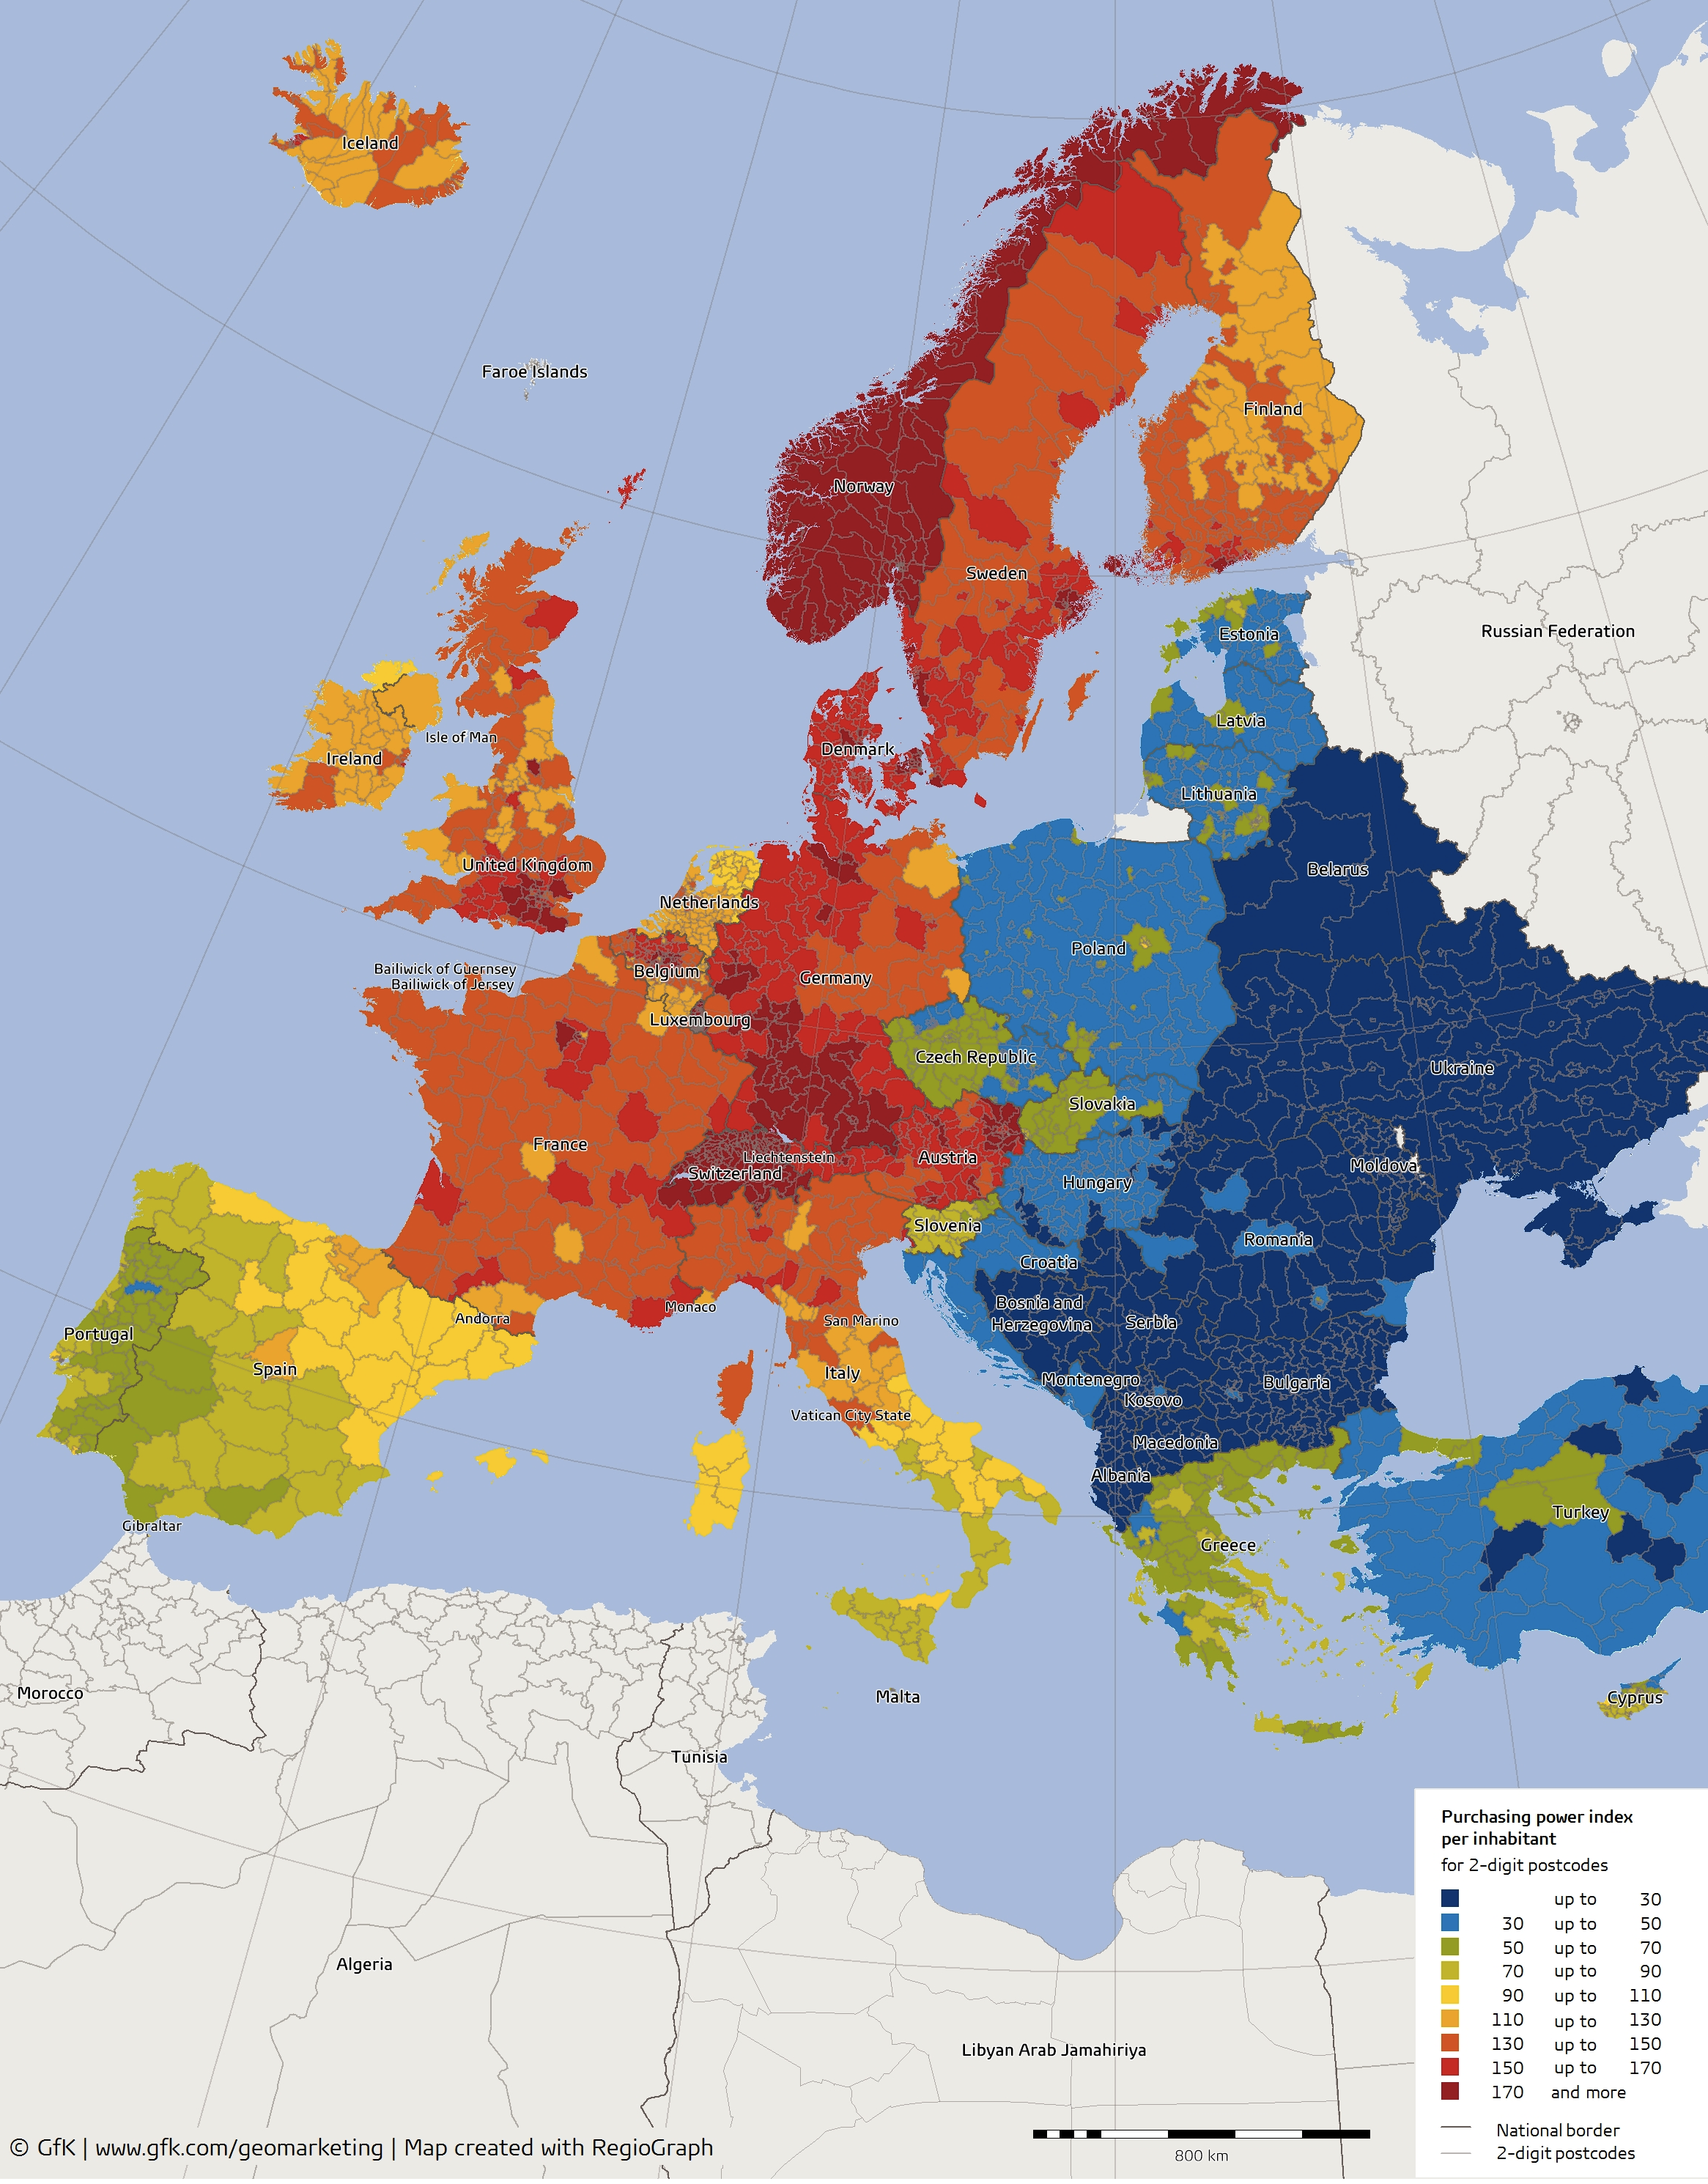 Pic.: GfK's purchasing power map for Europe (2014-2015)